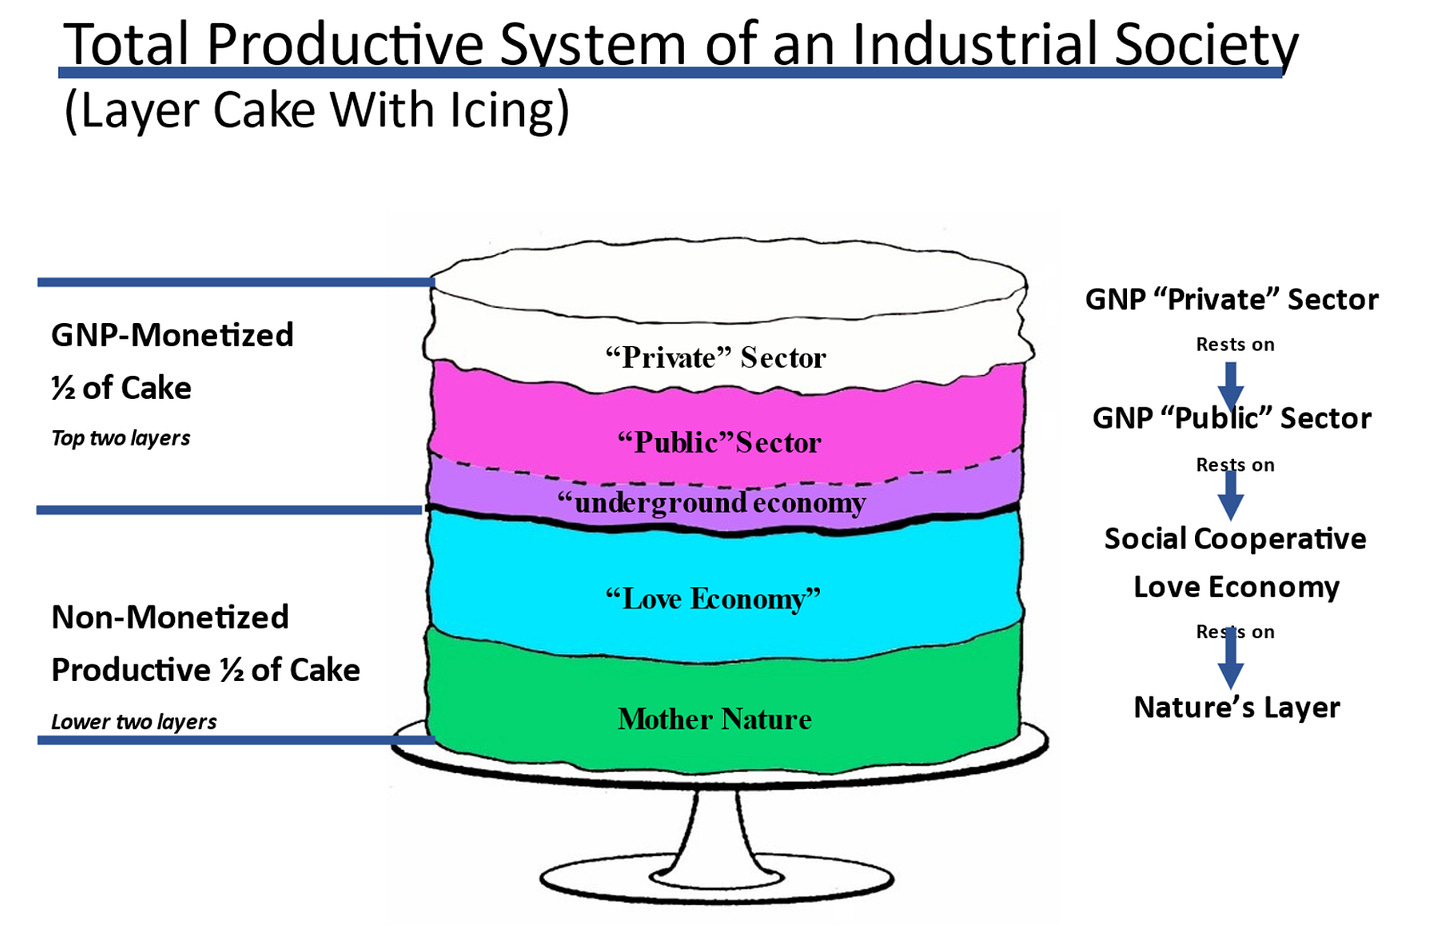 Alt text: Diagram in the shape of a cake, titled “Total Productive System of an Industrial Society (Layer Cake with Icing)”. The cake layers, from top to bottom are: “Private” Sector, “Public” Sector, “underground” economy, “Love Economy”, and “Mother Nature.”. The cake is sectioned into two parts vertically. The top three layers (private sector through to underground economy) is labelled as the GNP-Monetized ½ of Cake. The bottom two layers are labelled as the Non-Monetized Productive ½ of Cake. Arrows show that each cake layer rests on the ones below it. 